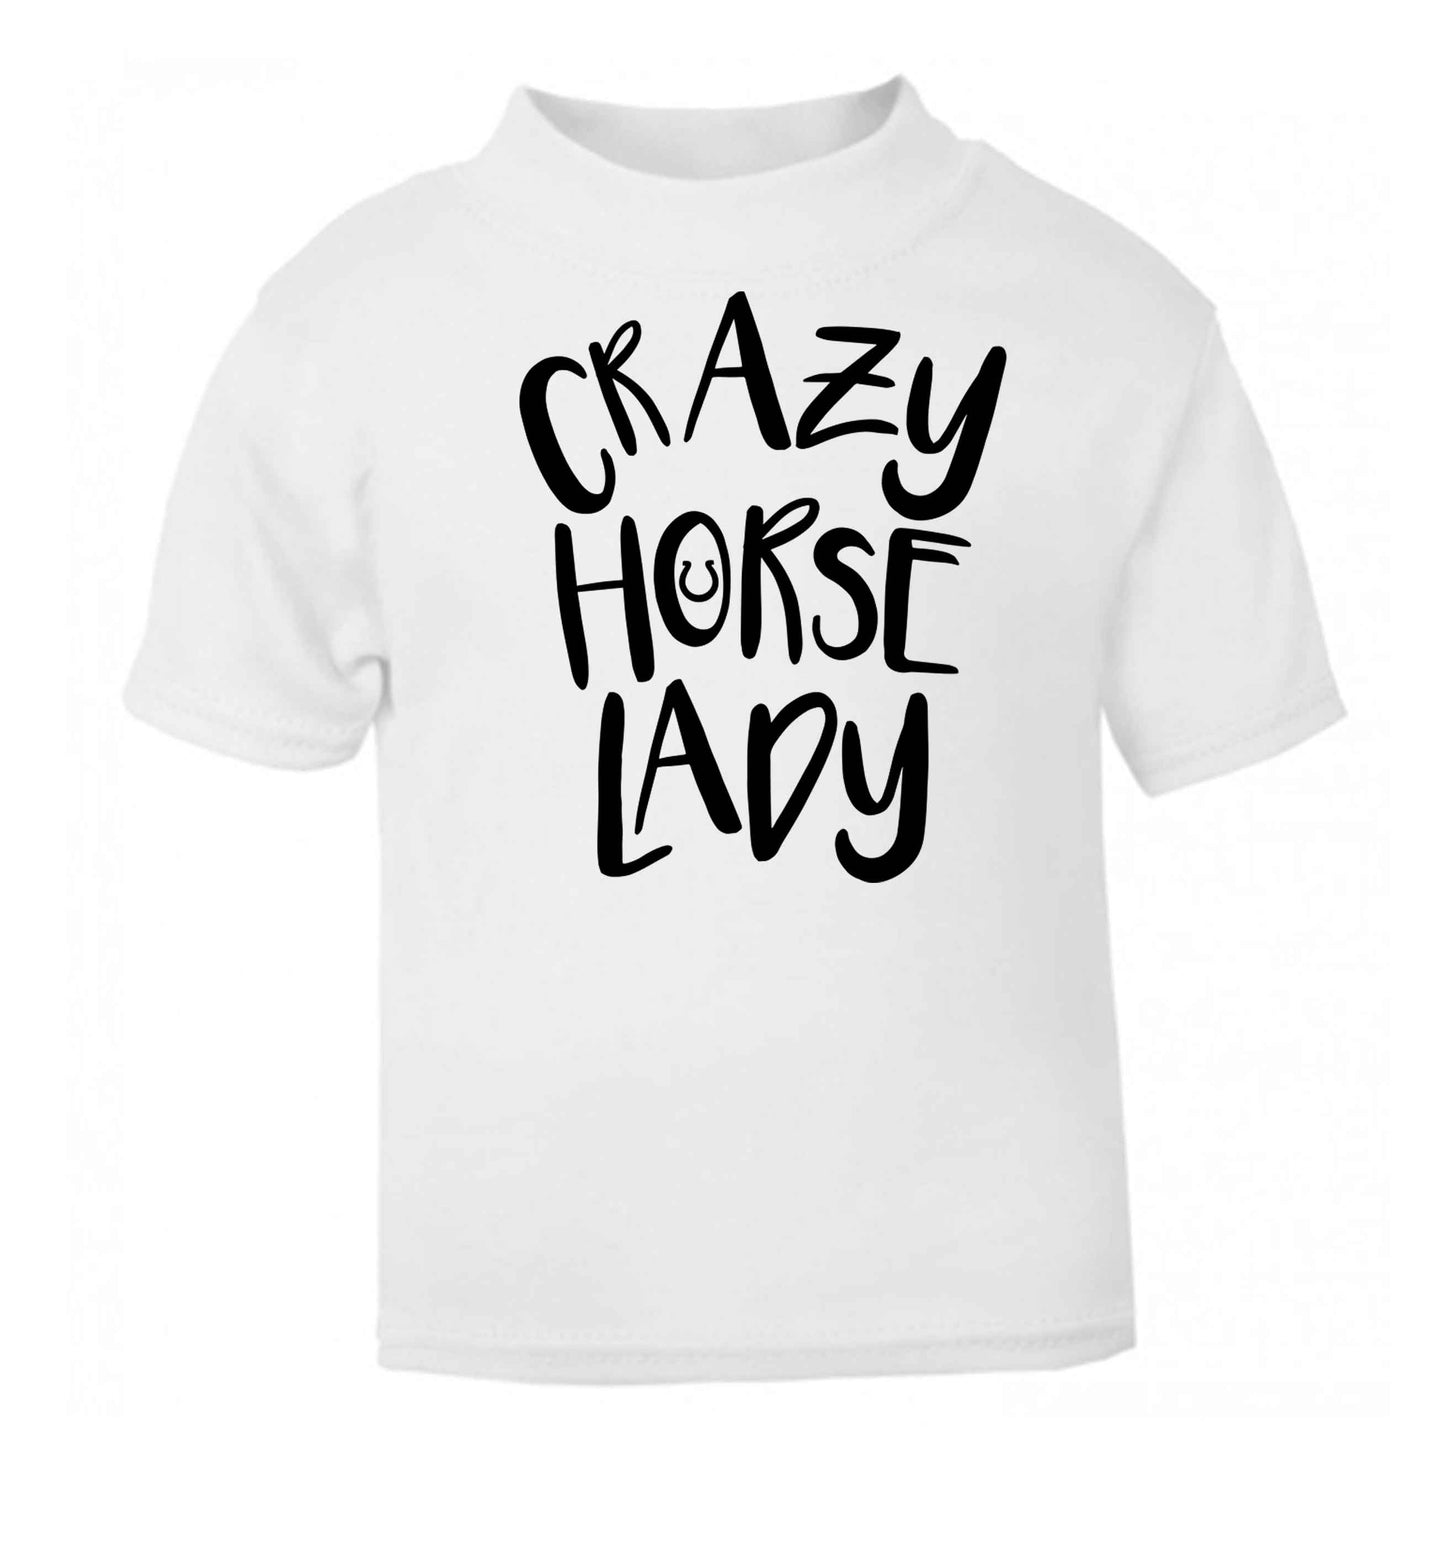 Crazy horse lady white baby toddler Tshirt 2 Years